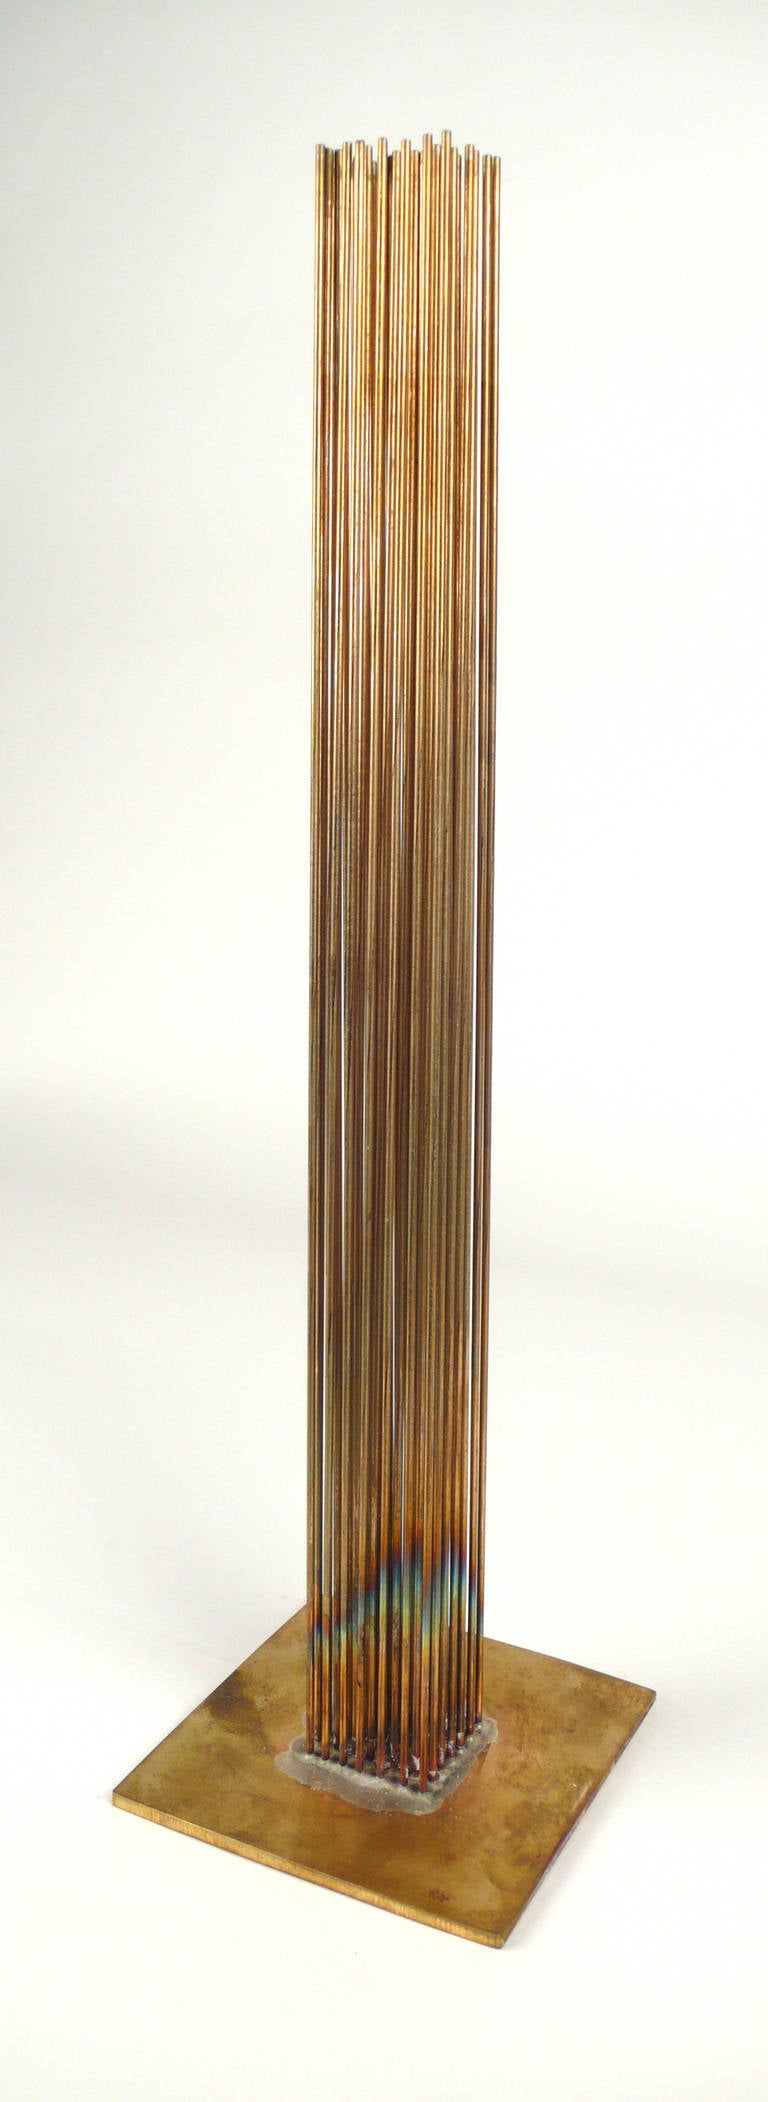 Bertoia Studio Sonambient Sculpture
49 silicon-bronze rods adhered with silver to a solid brass base. 
Created in 2014 by Val Bertoia in the Harry Bertoia Studio.
Signed certificate of authenticity included.

The sculpture produces a beautiful